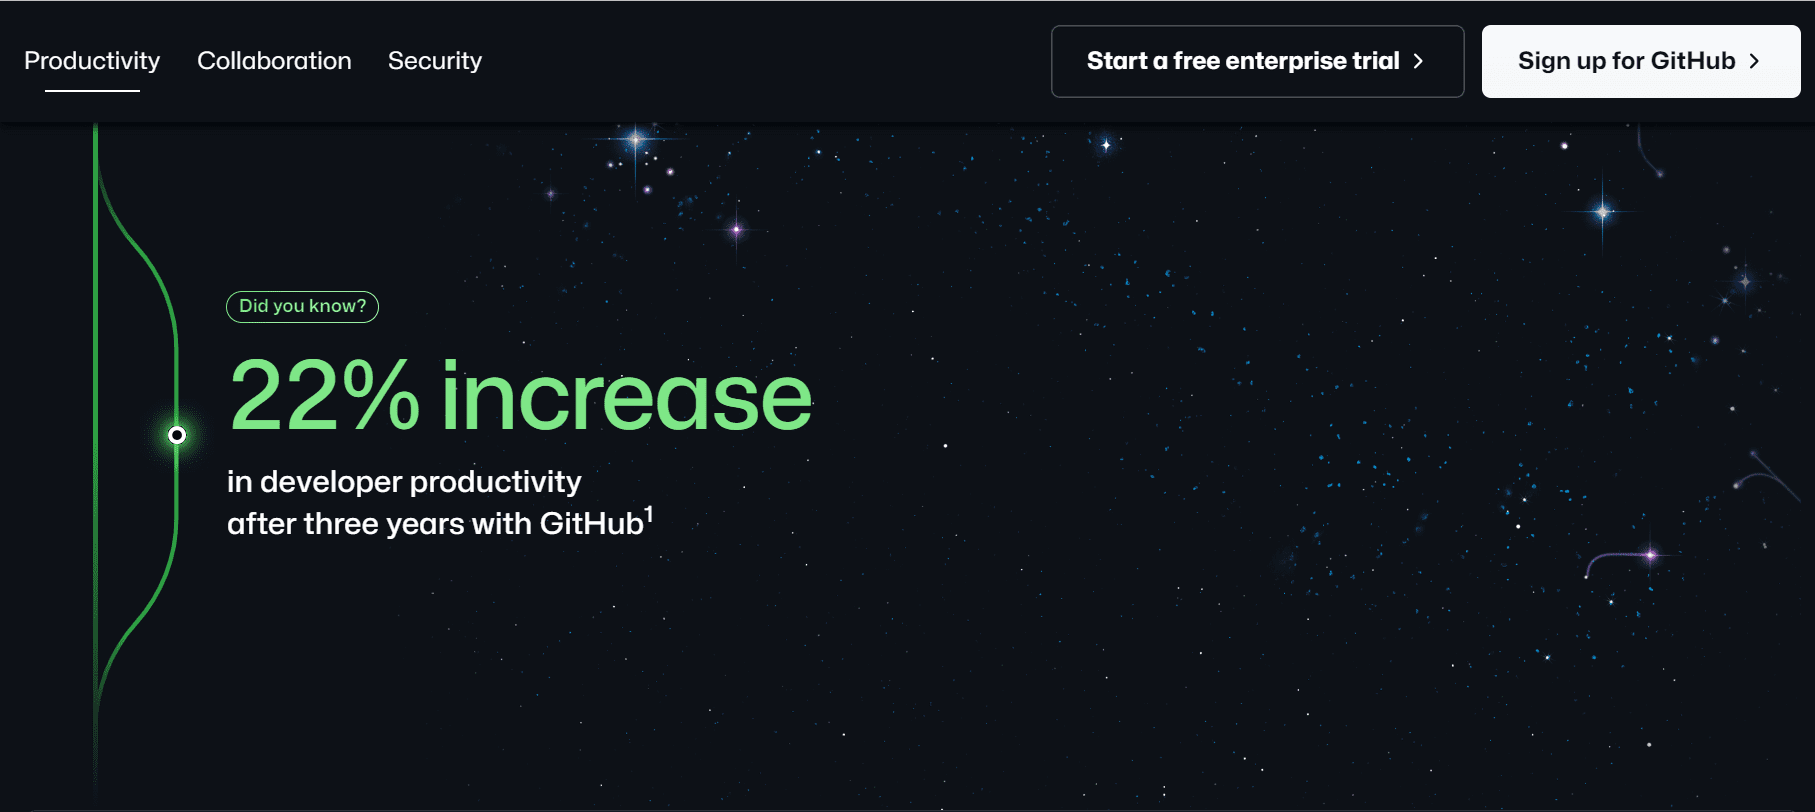 An info page from GitHub. There are stars in the background, the design is very dark and futuristic.